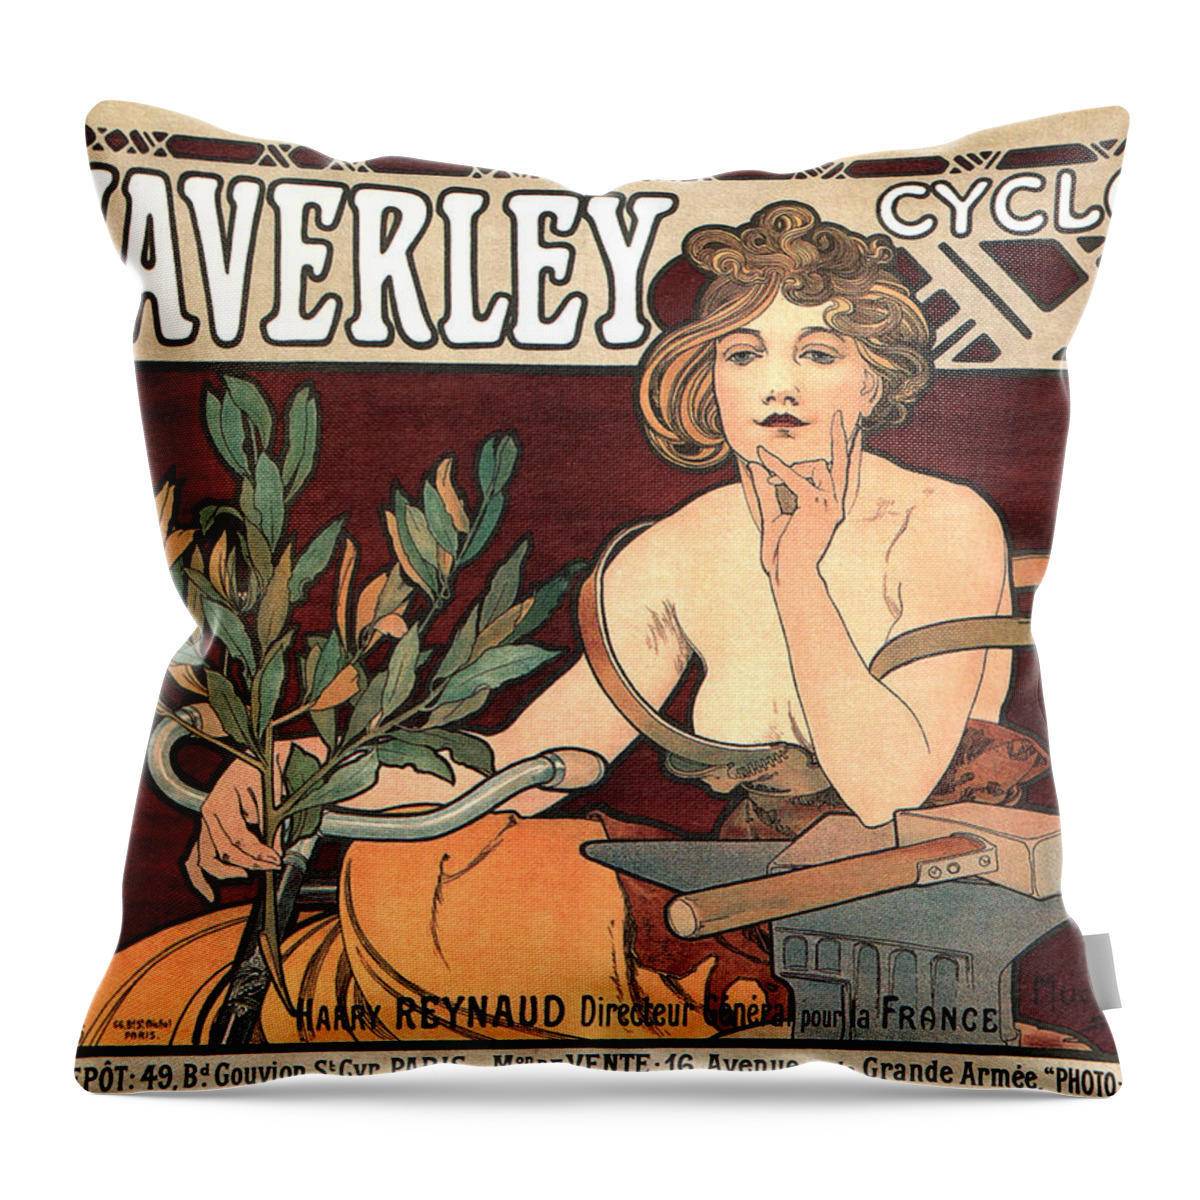 Vintage Throw Pillow featuring the mixed media Waverley Cycles - Bicycle - Vintage French Advertising Poster by Studio Grafiikka